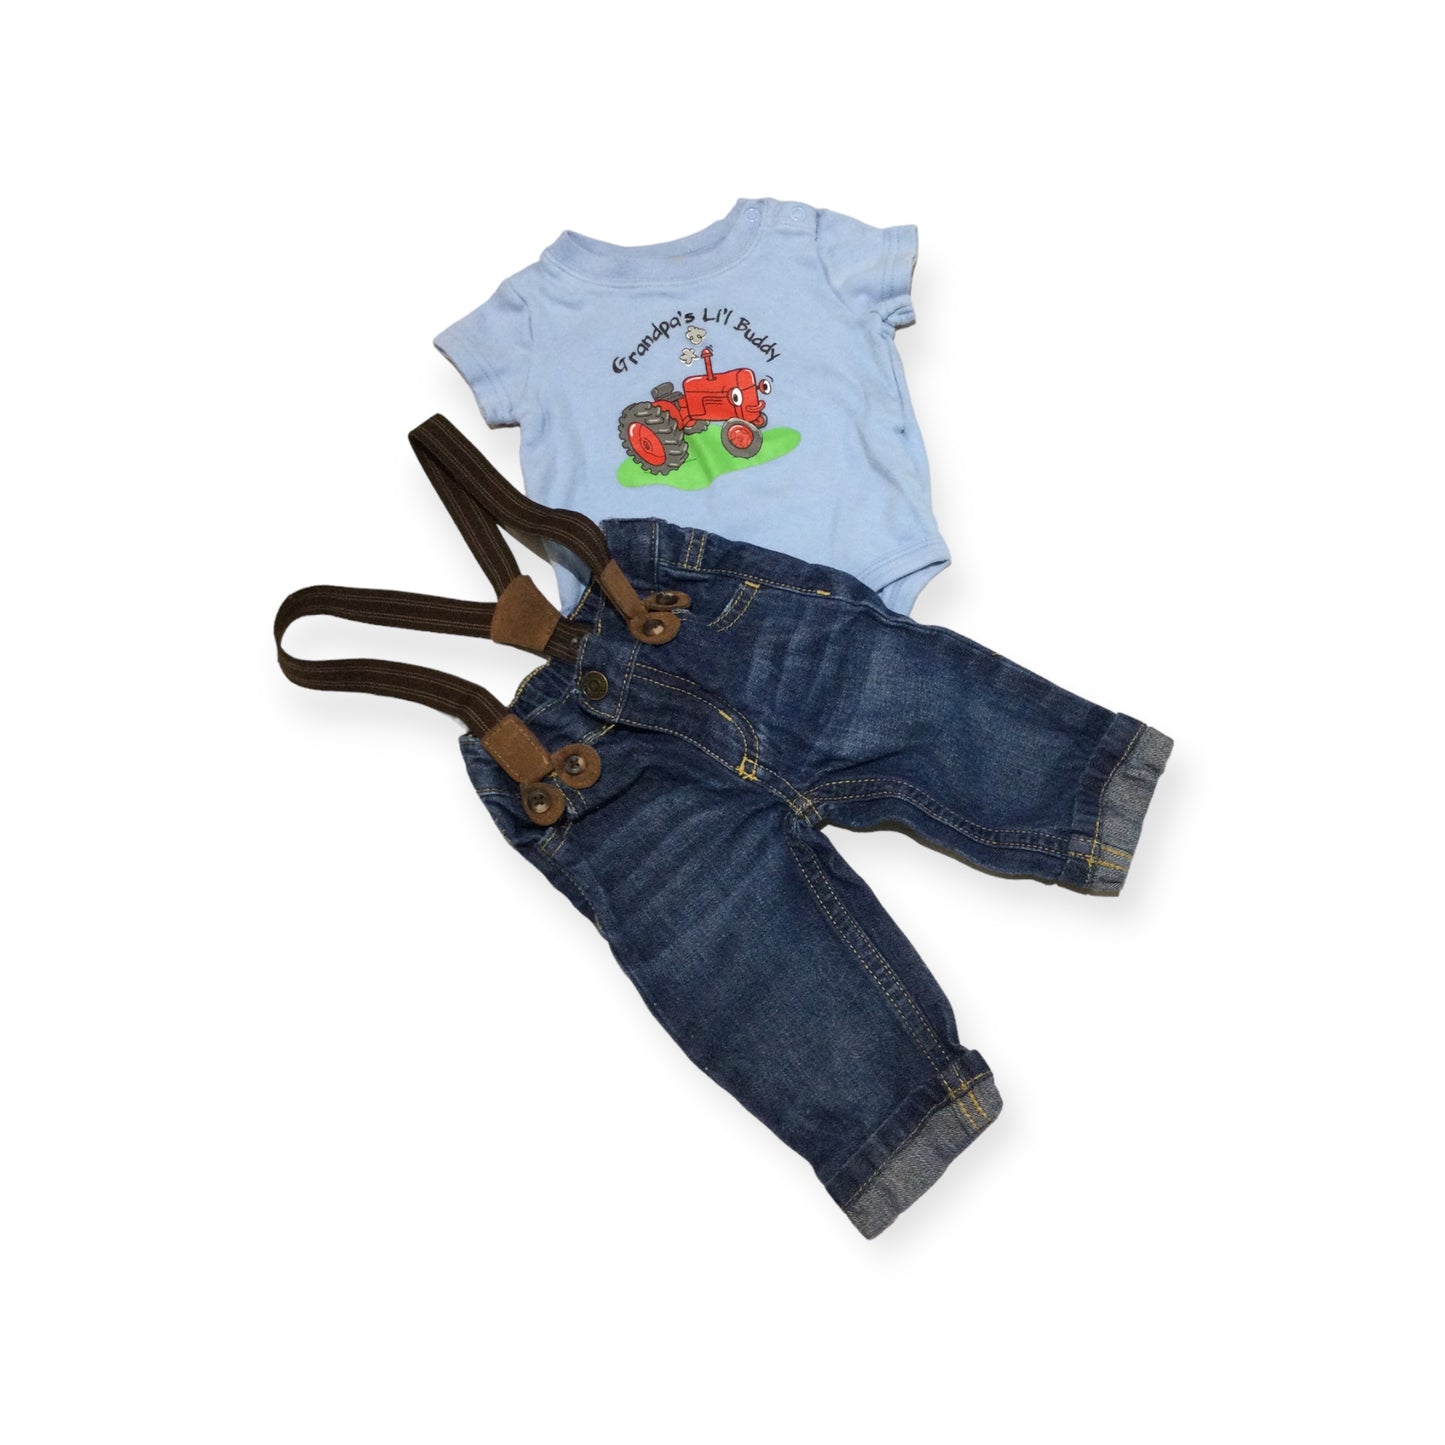 Onesie tractor size 3/6m,pants,size 3m